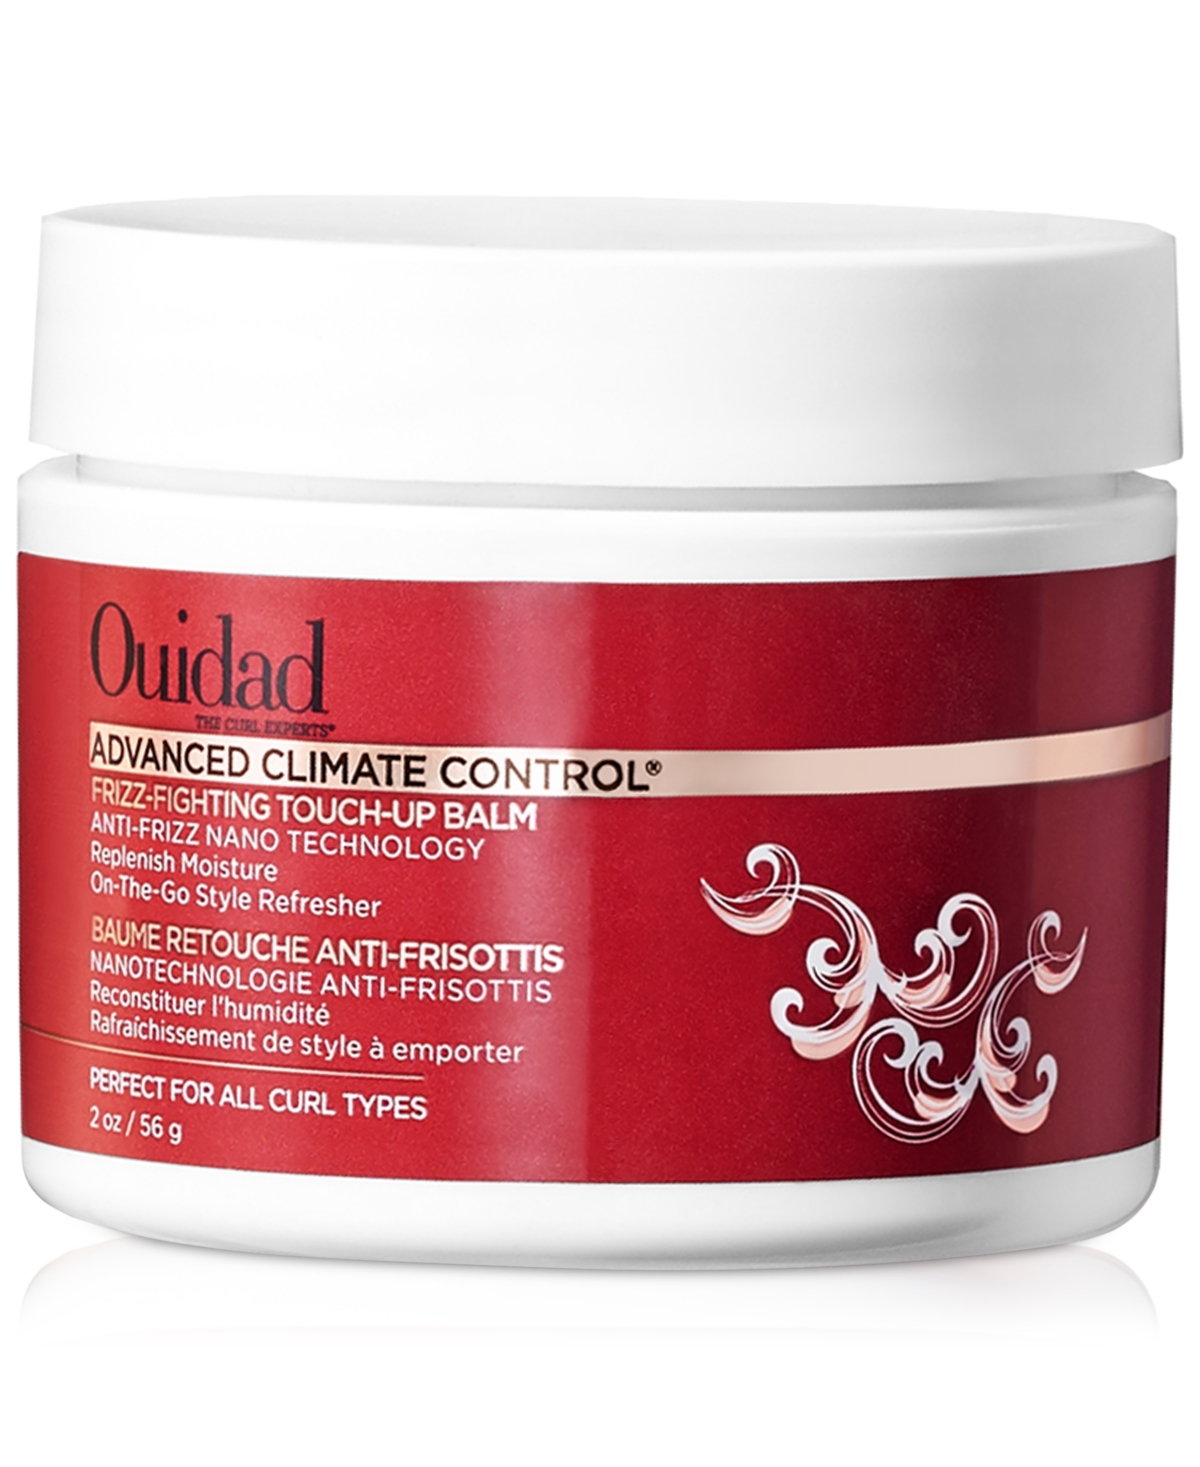 Shop Ouidad Frizz-fighting Touch-up Balm